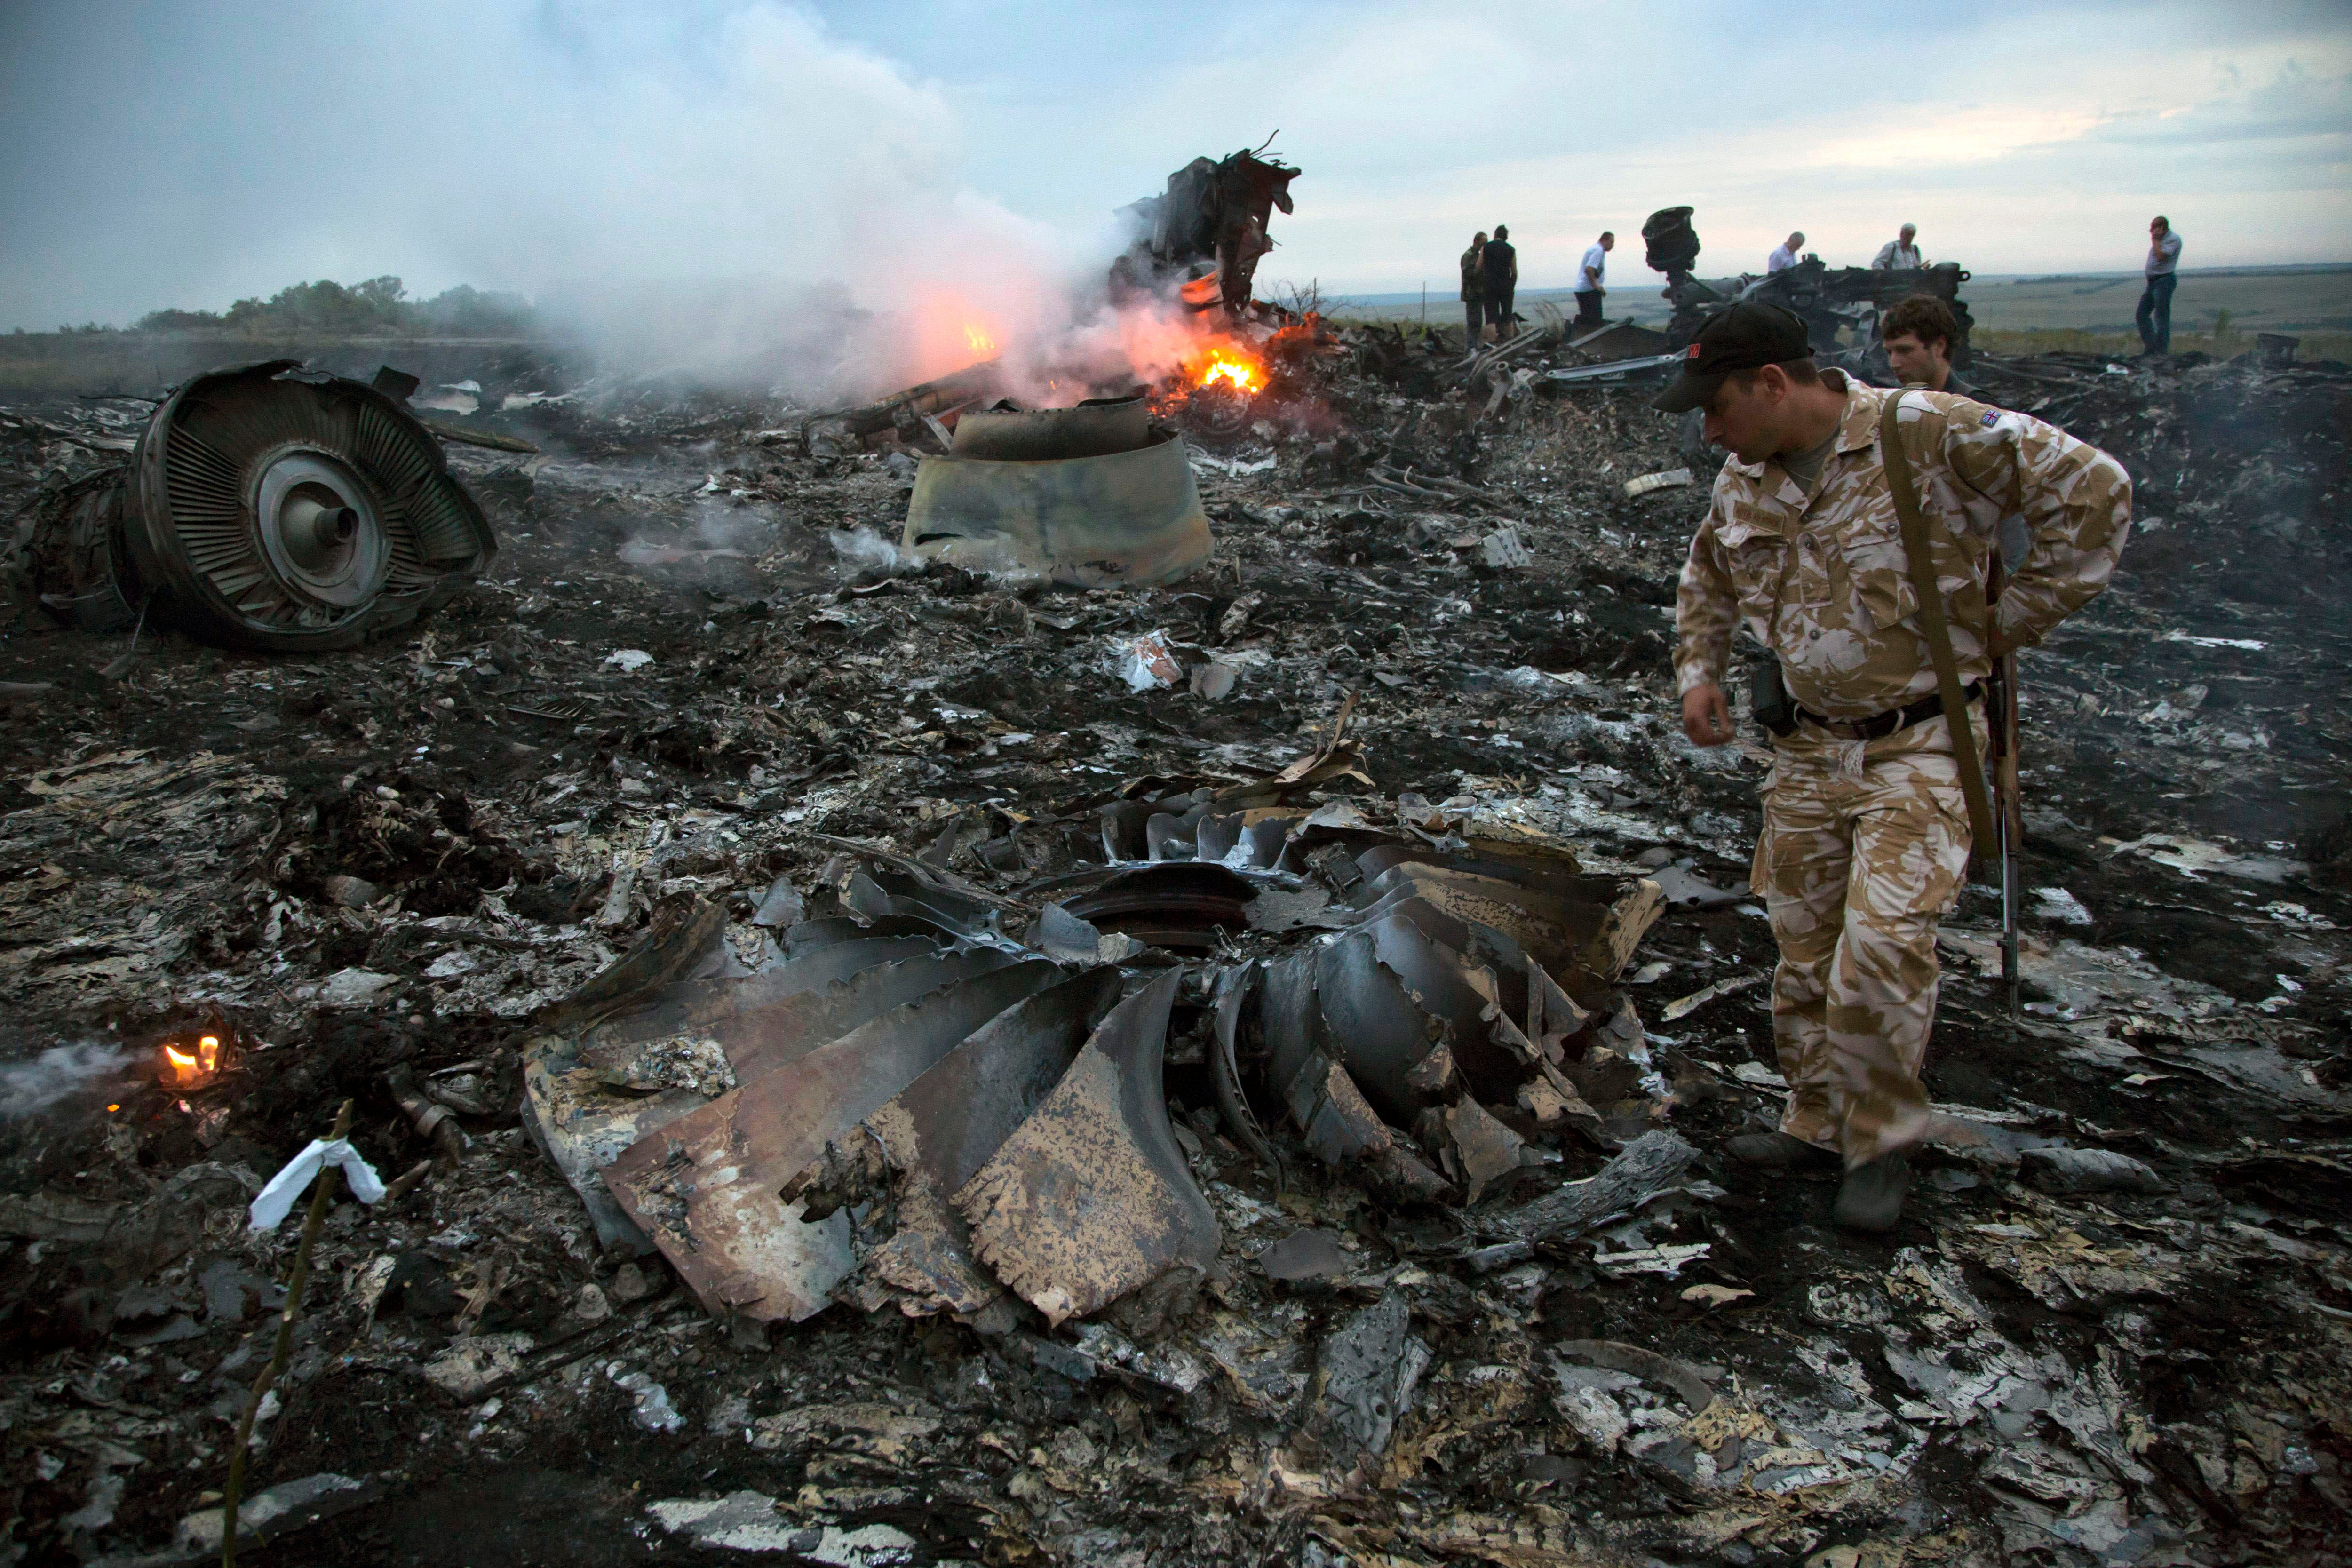 A man walks among the debris at the crash site near the village of Hrabove, in Ukraine